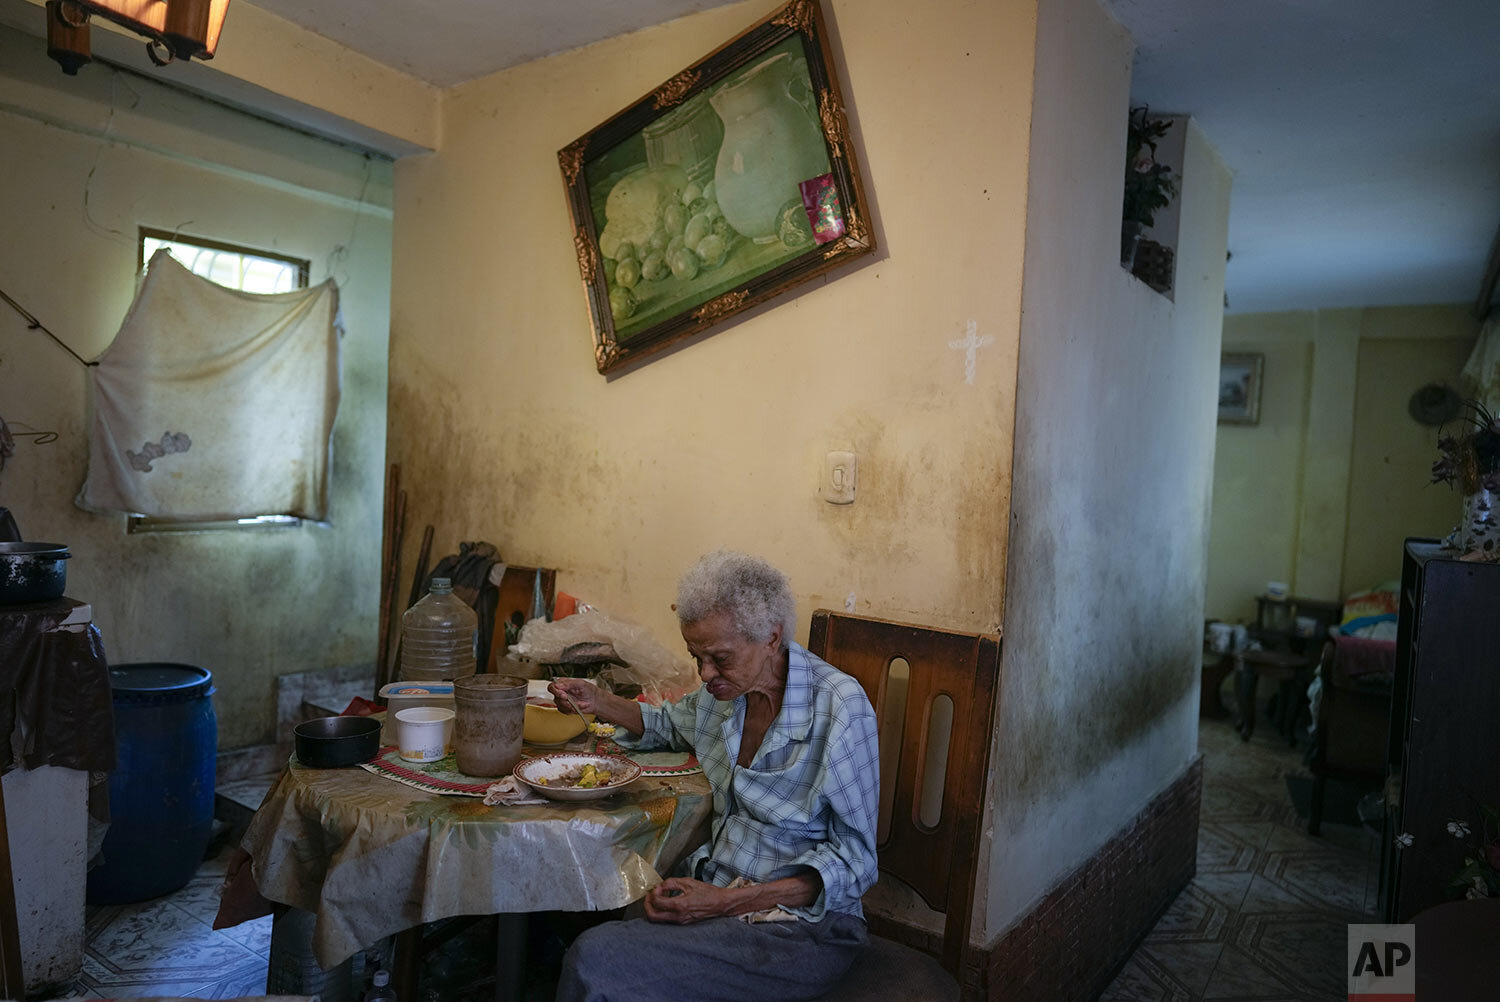  Zenobia Ansualve, 88, eats lunch in her home where she lives alone in Caracas, Venezuela, Aug. 18, 2021. Ansualve said she hasn't left her home since the start of the COVID-19 pandemic and survives on $20 a month from a room she rents. (AP Photo/Ari